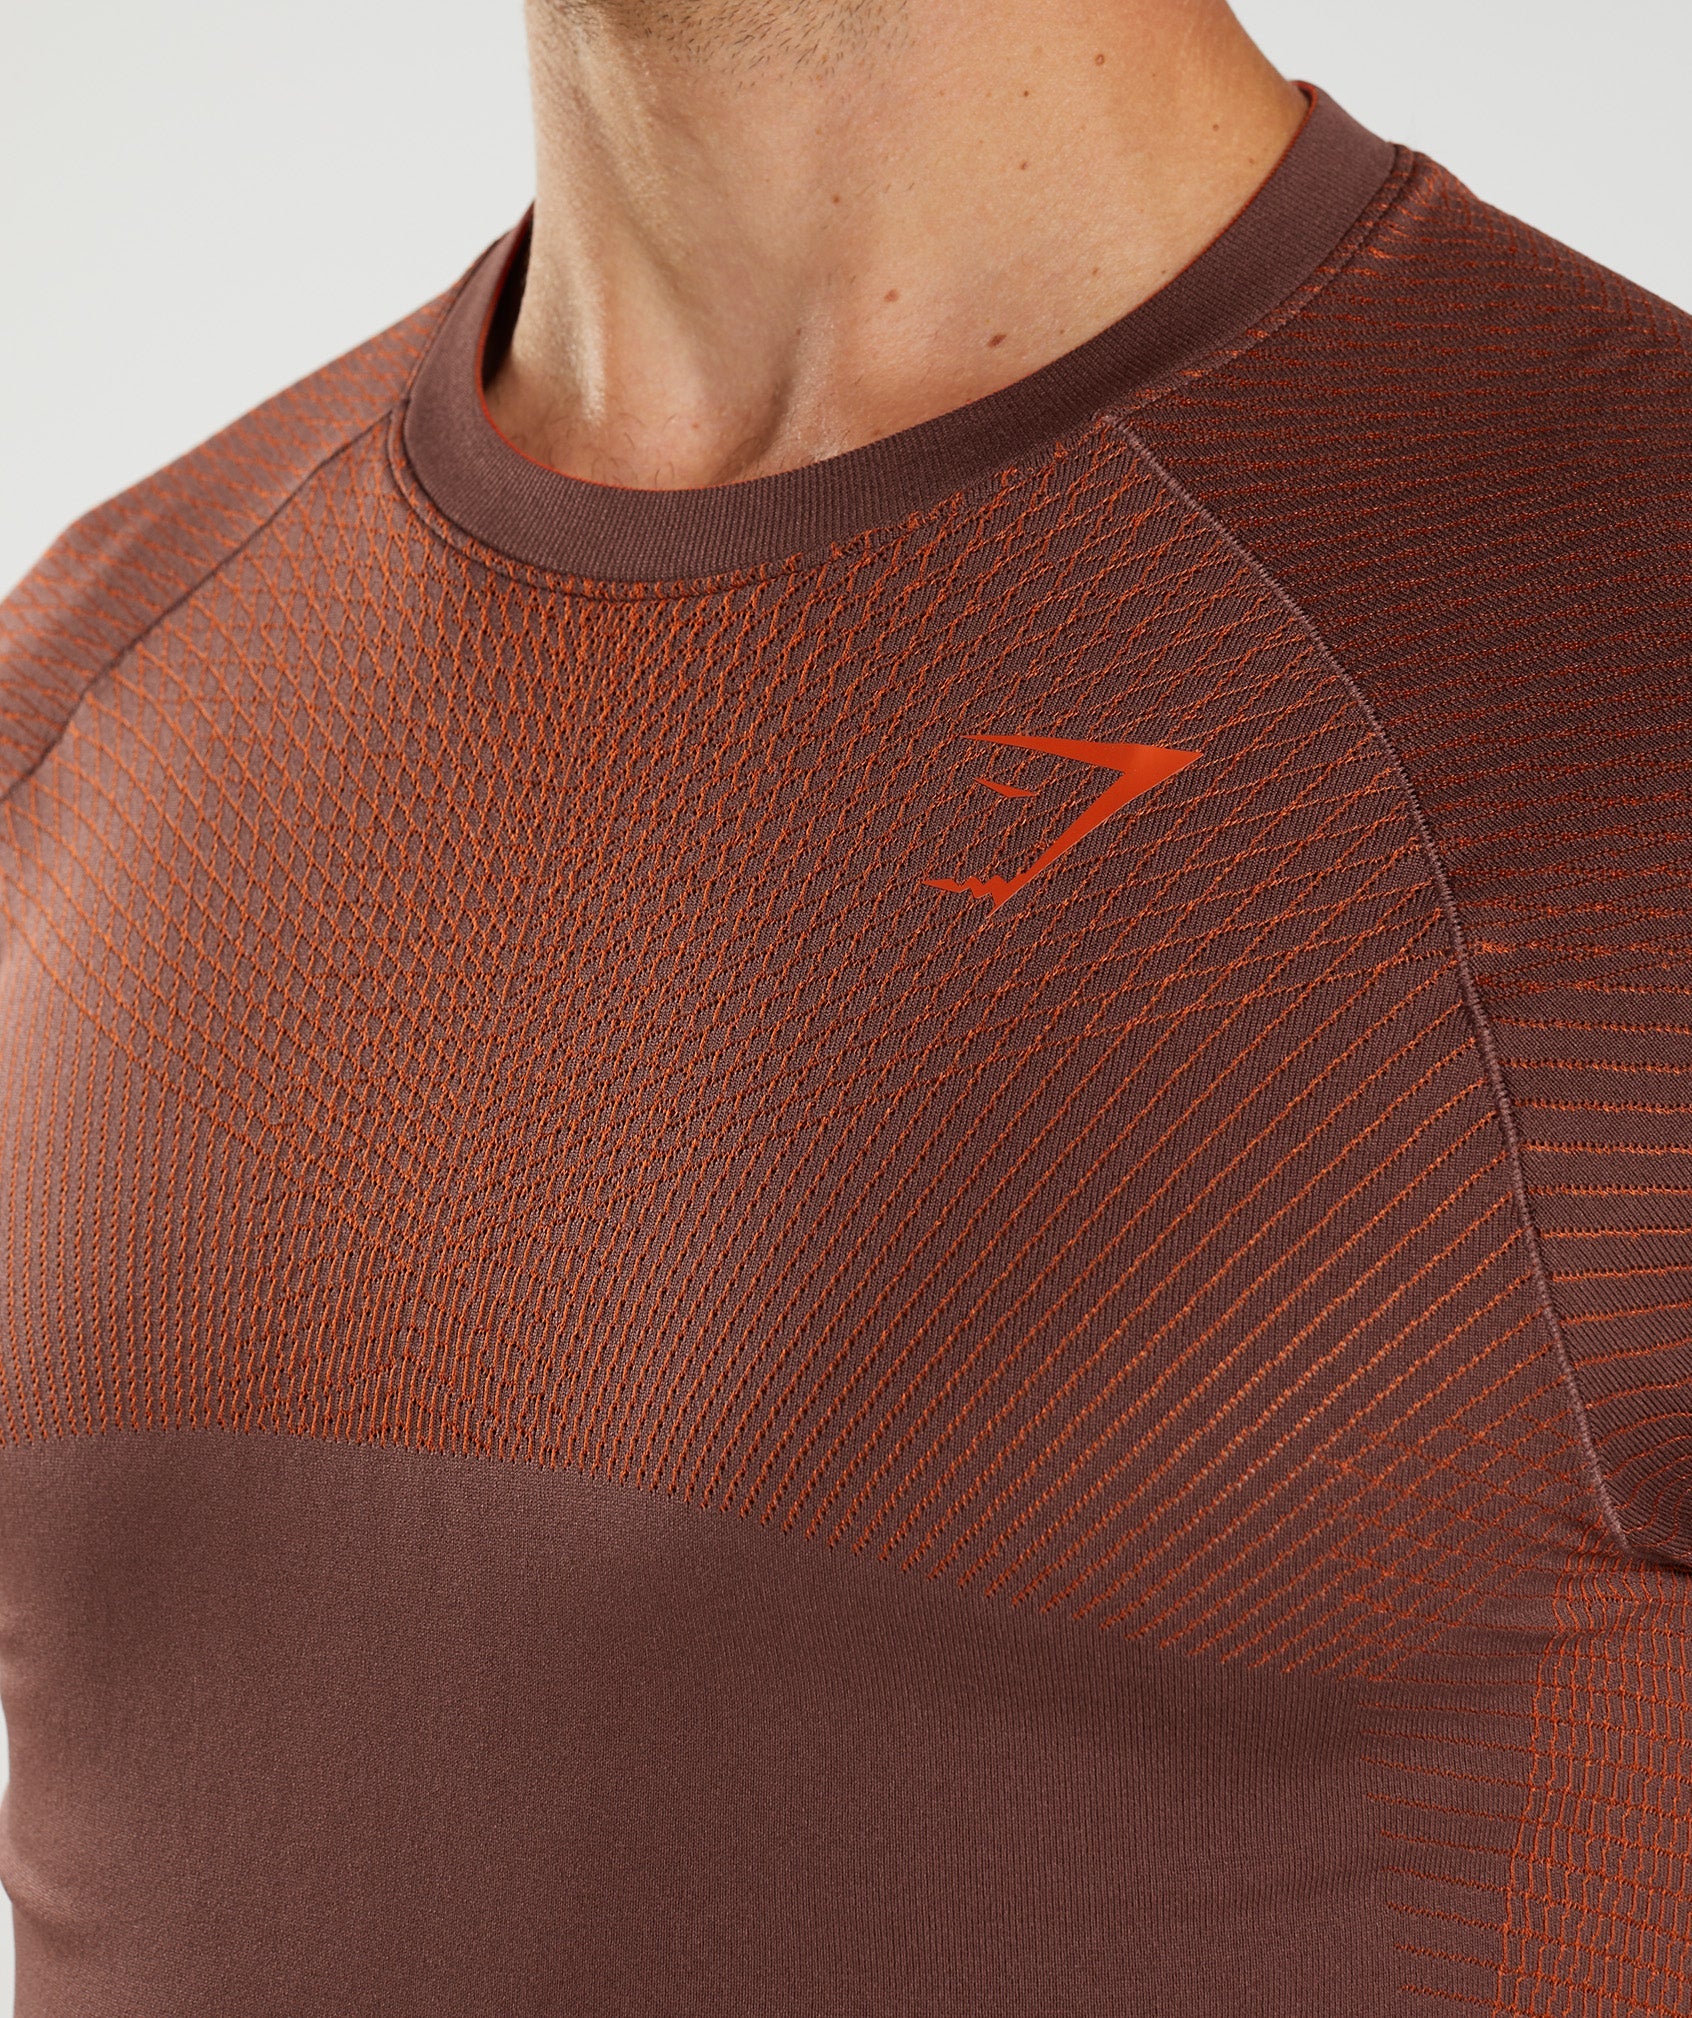 Apex Seamless T-Shirt in Cherry Brown/Pepper Red - view 6